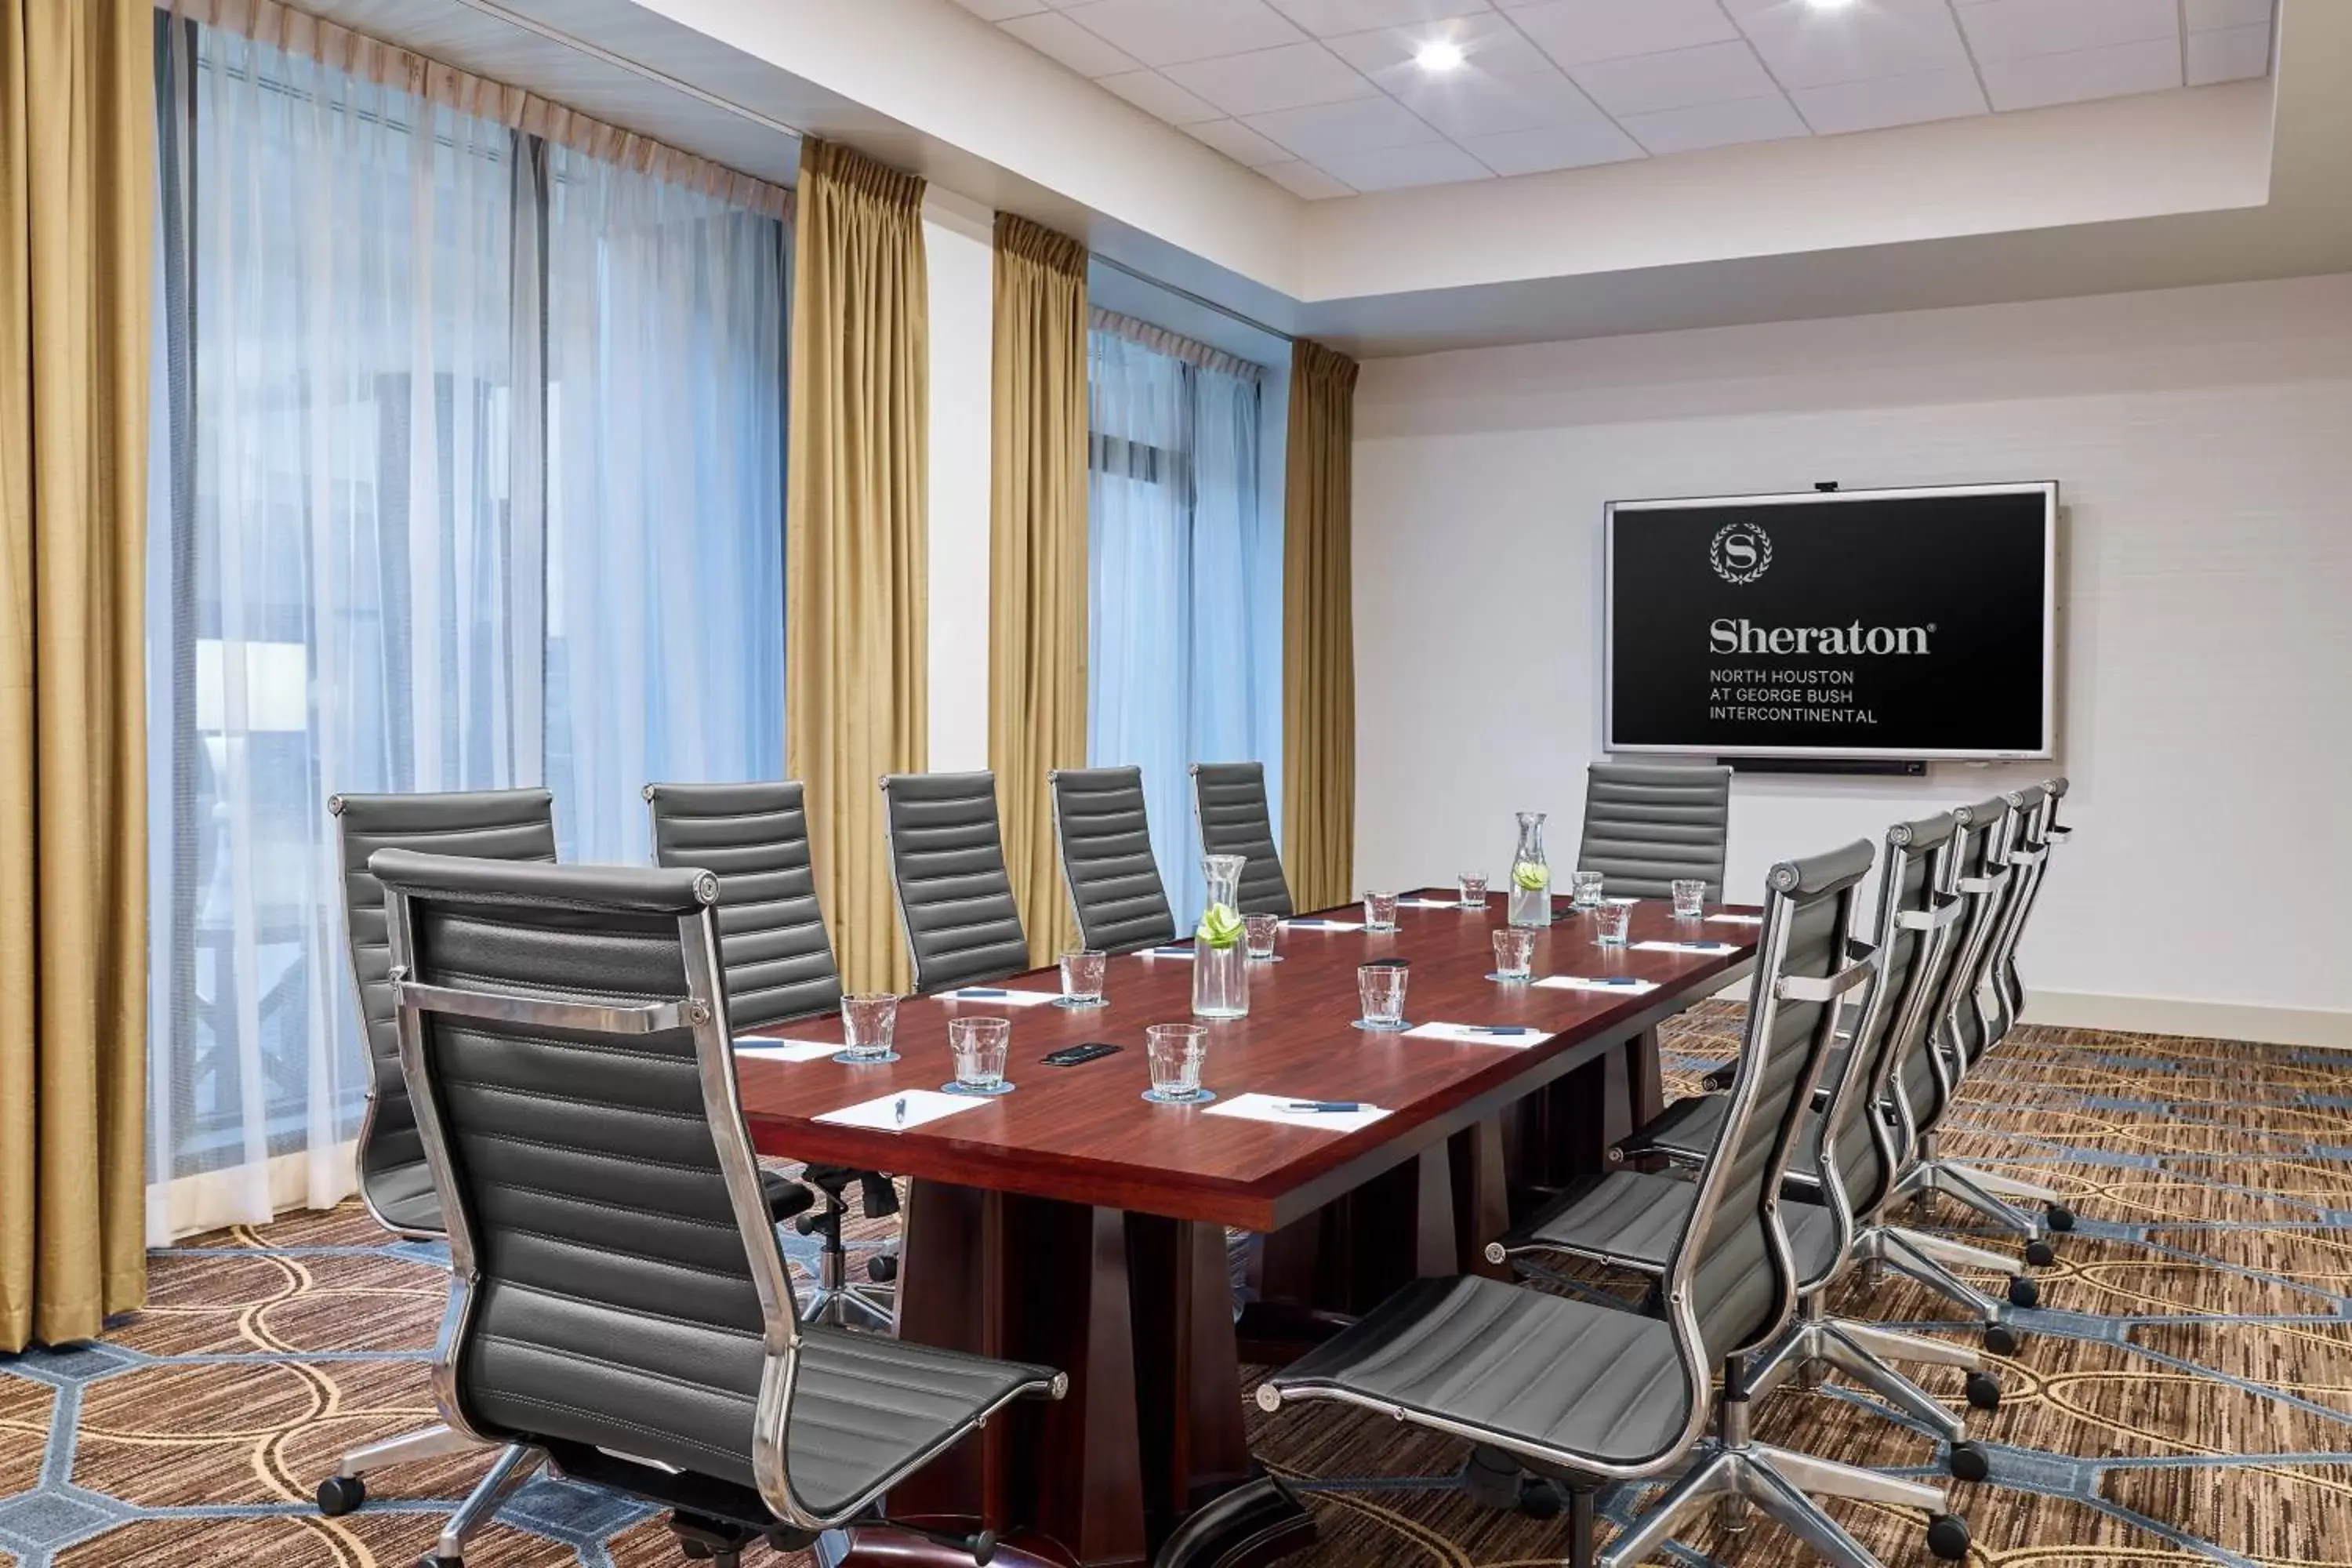 Meeting/conference room in Sheraton North Houston at George Bush Intercontinental